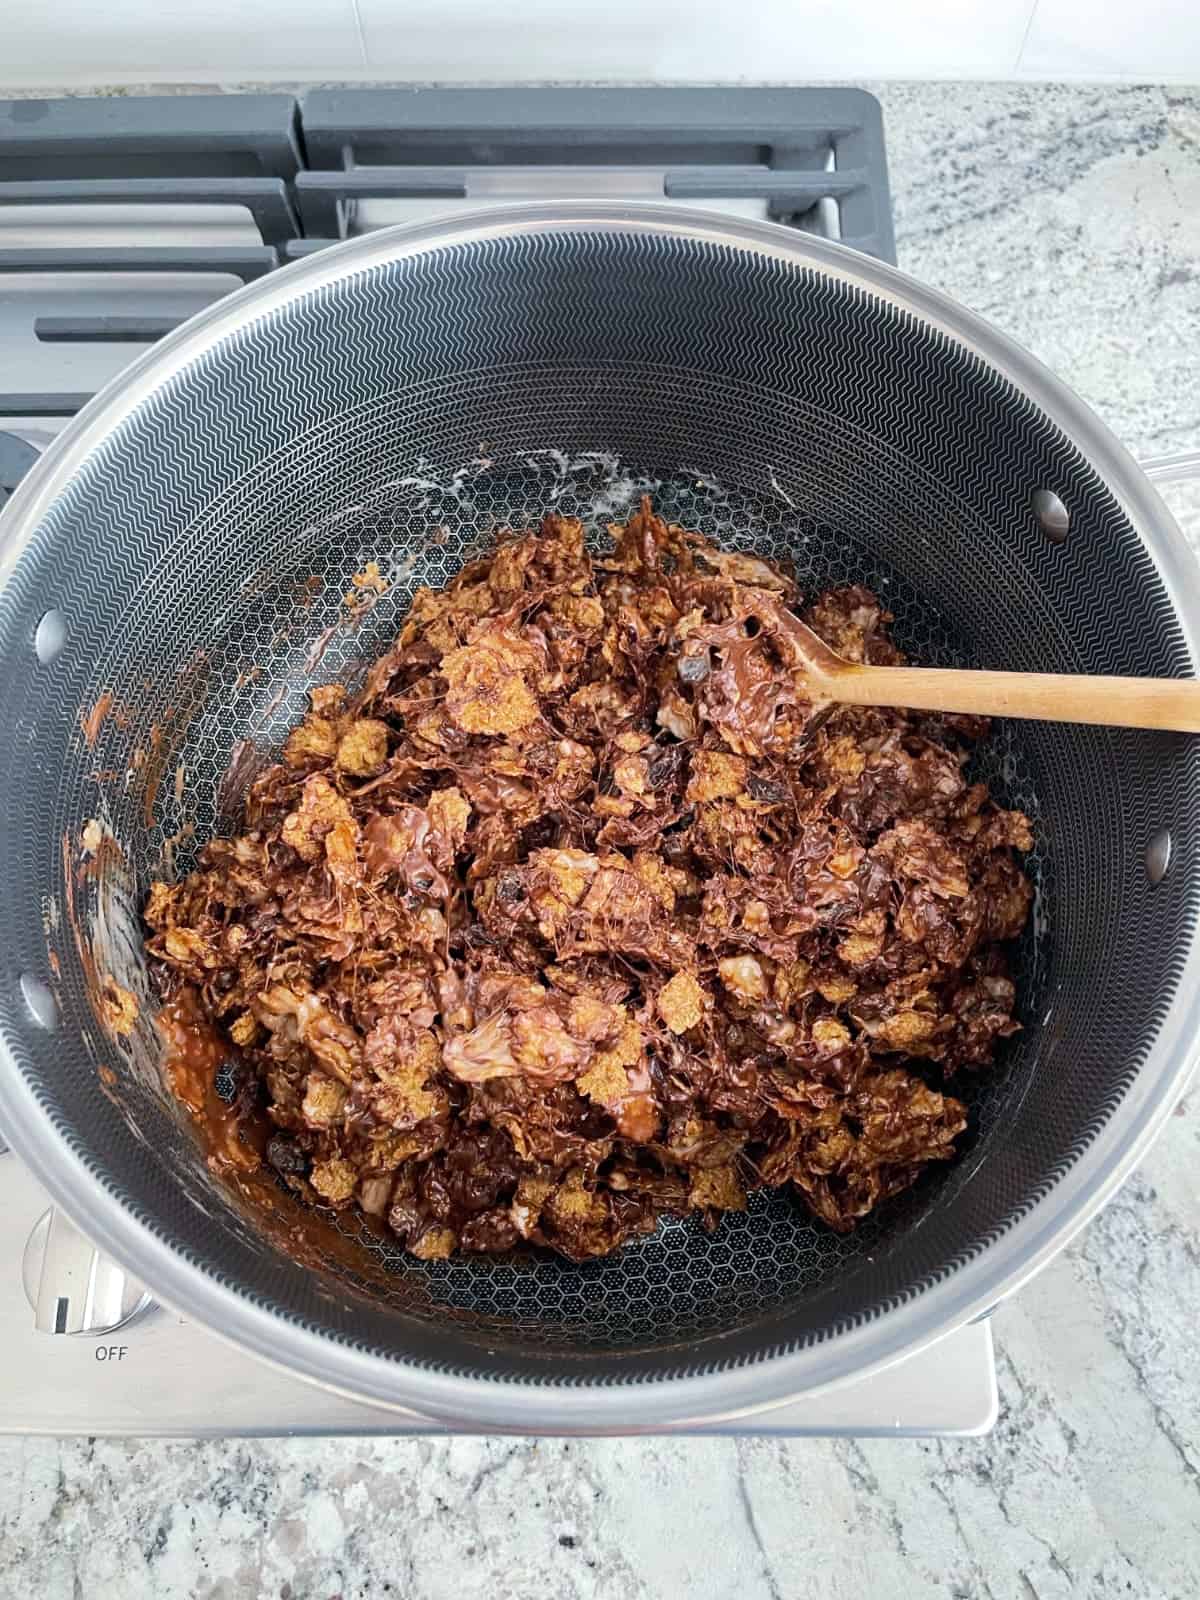 Stirring to coat Raisin Bran with melted marshmallow and chocolate mixture in saucepan.